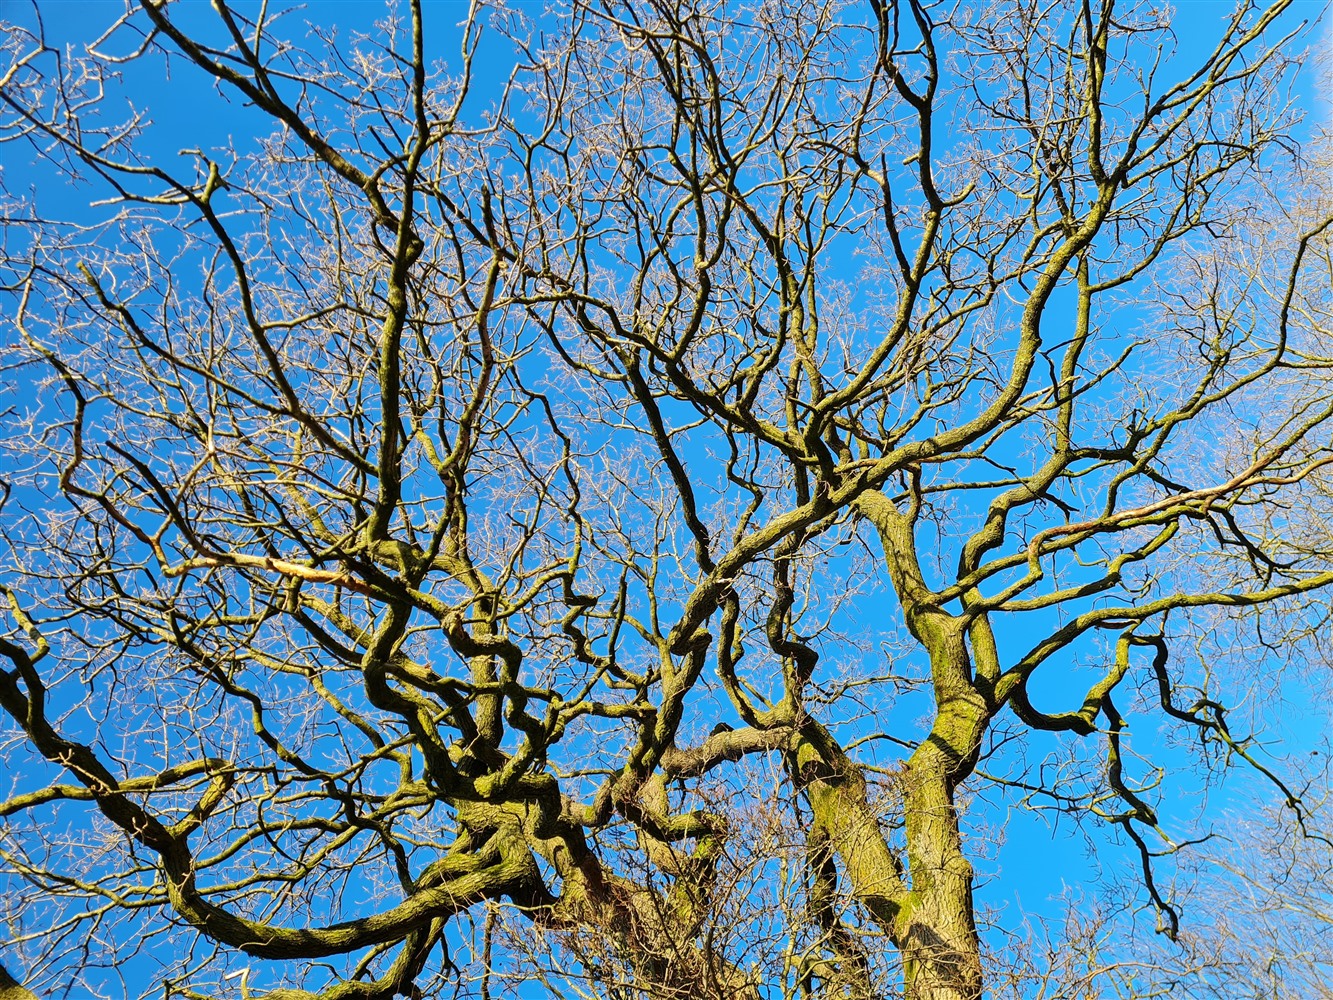 Bare branches of a tree against a blue winter sky